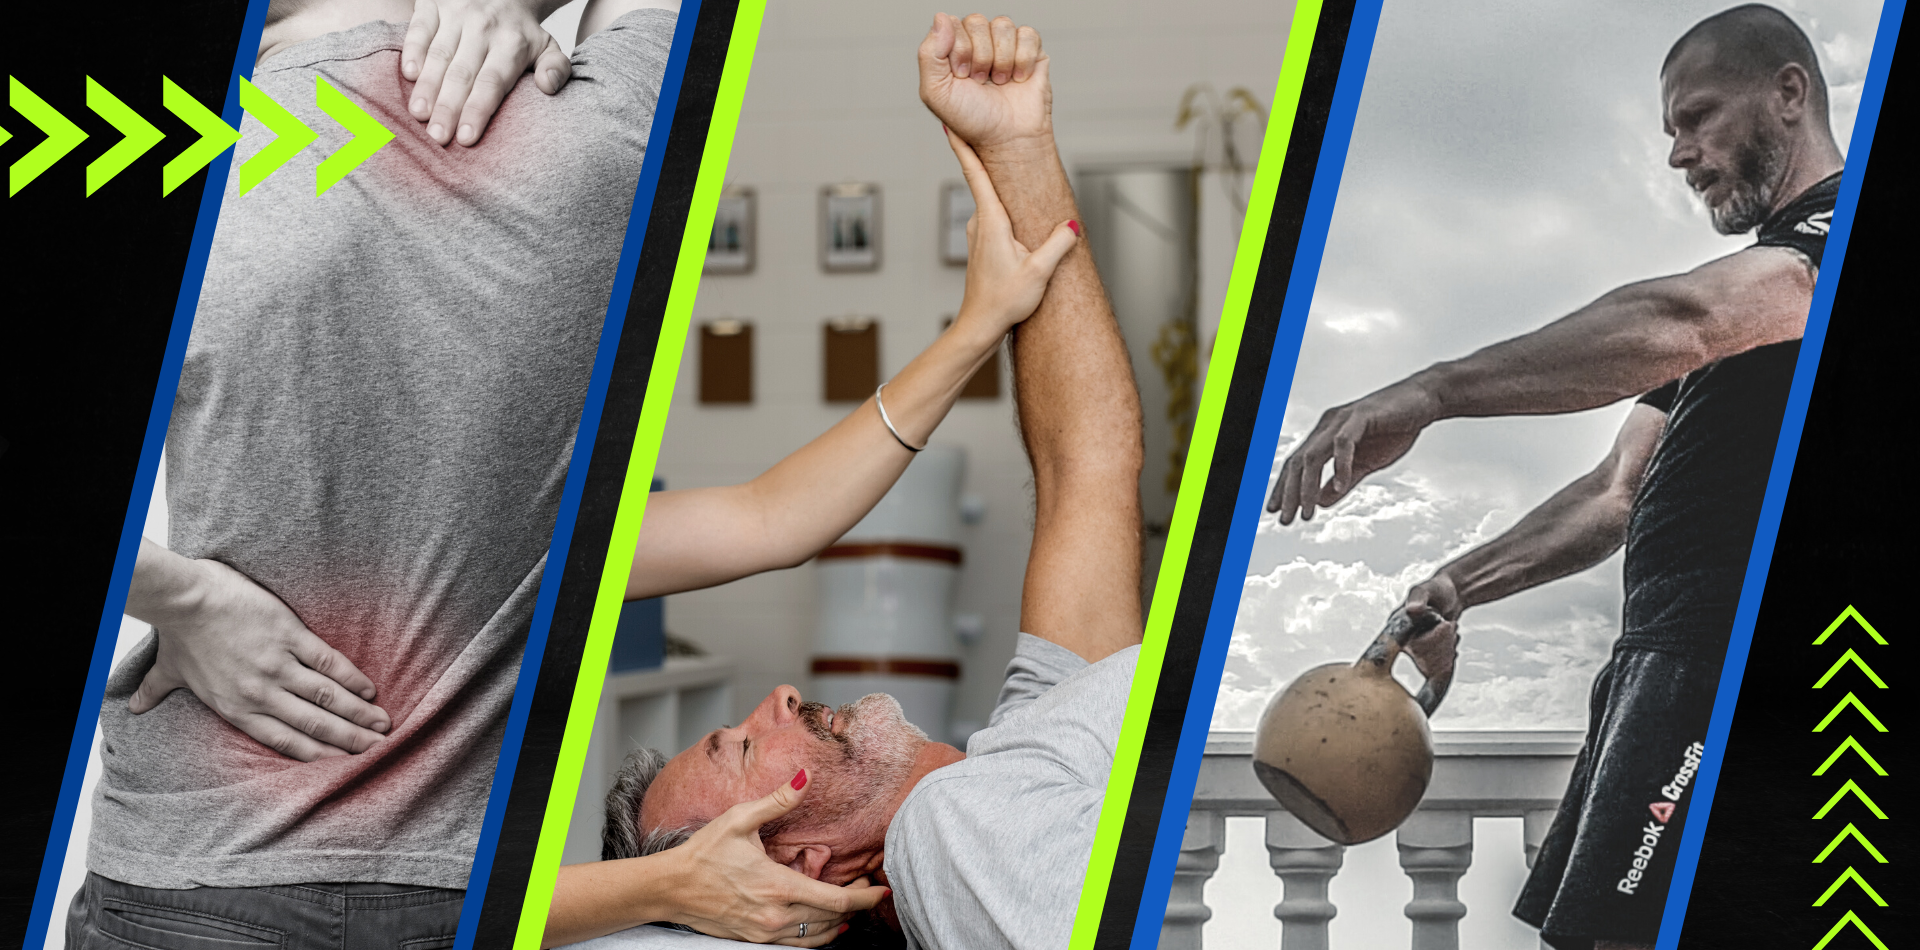 Oz Chiropractic Sports Injury Care: Help accelerate the healing process